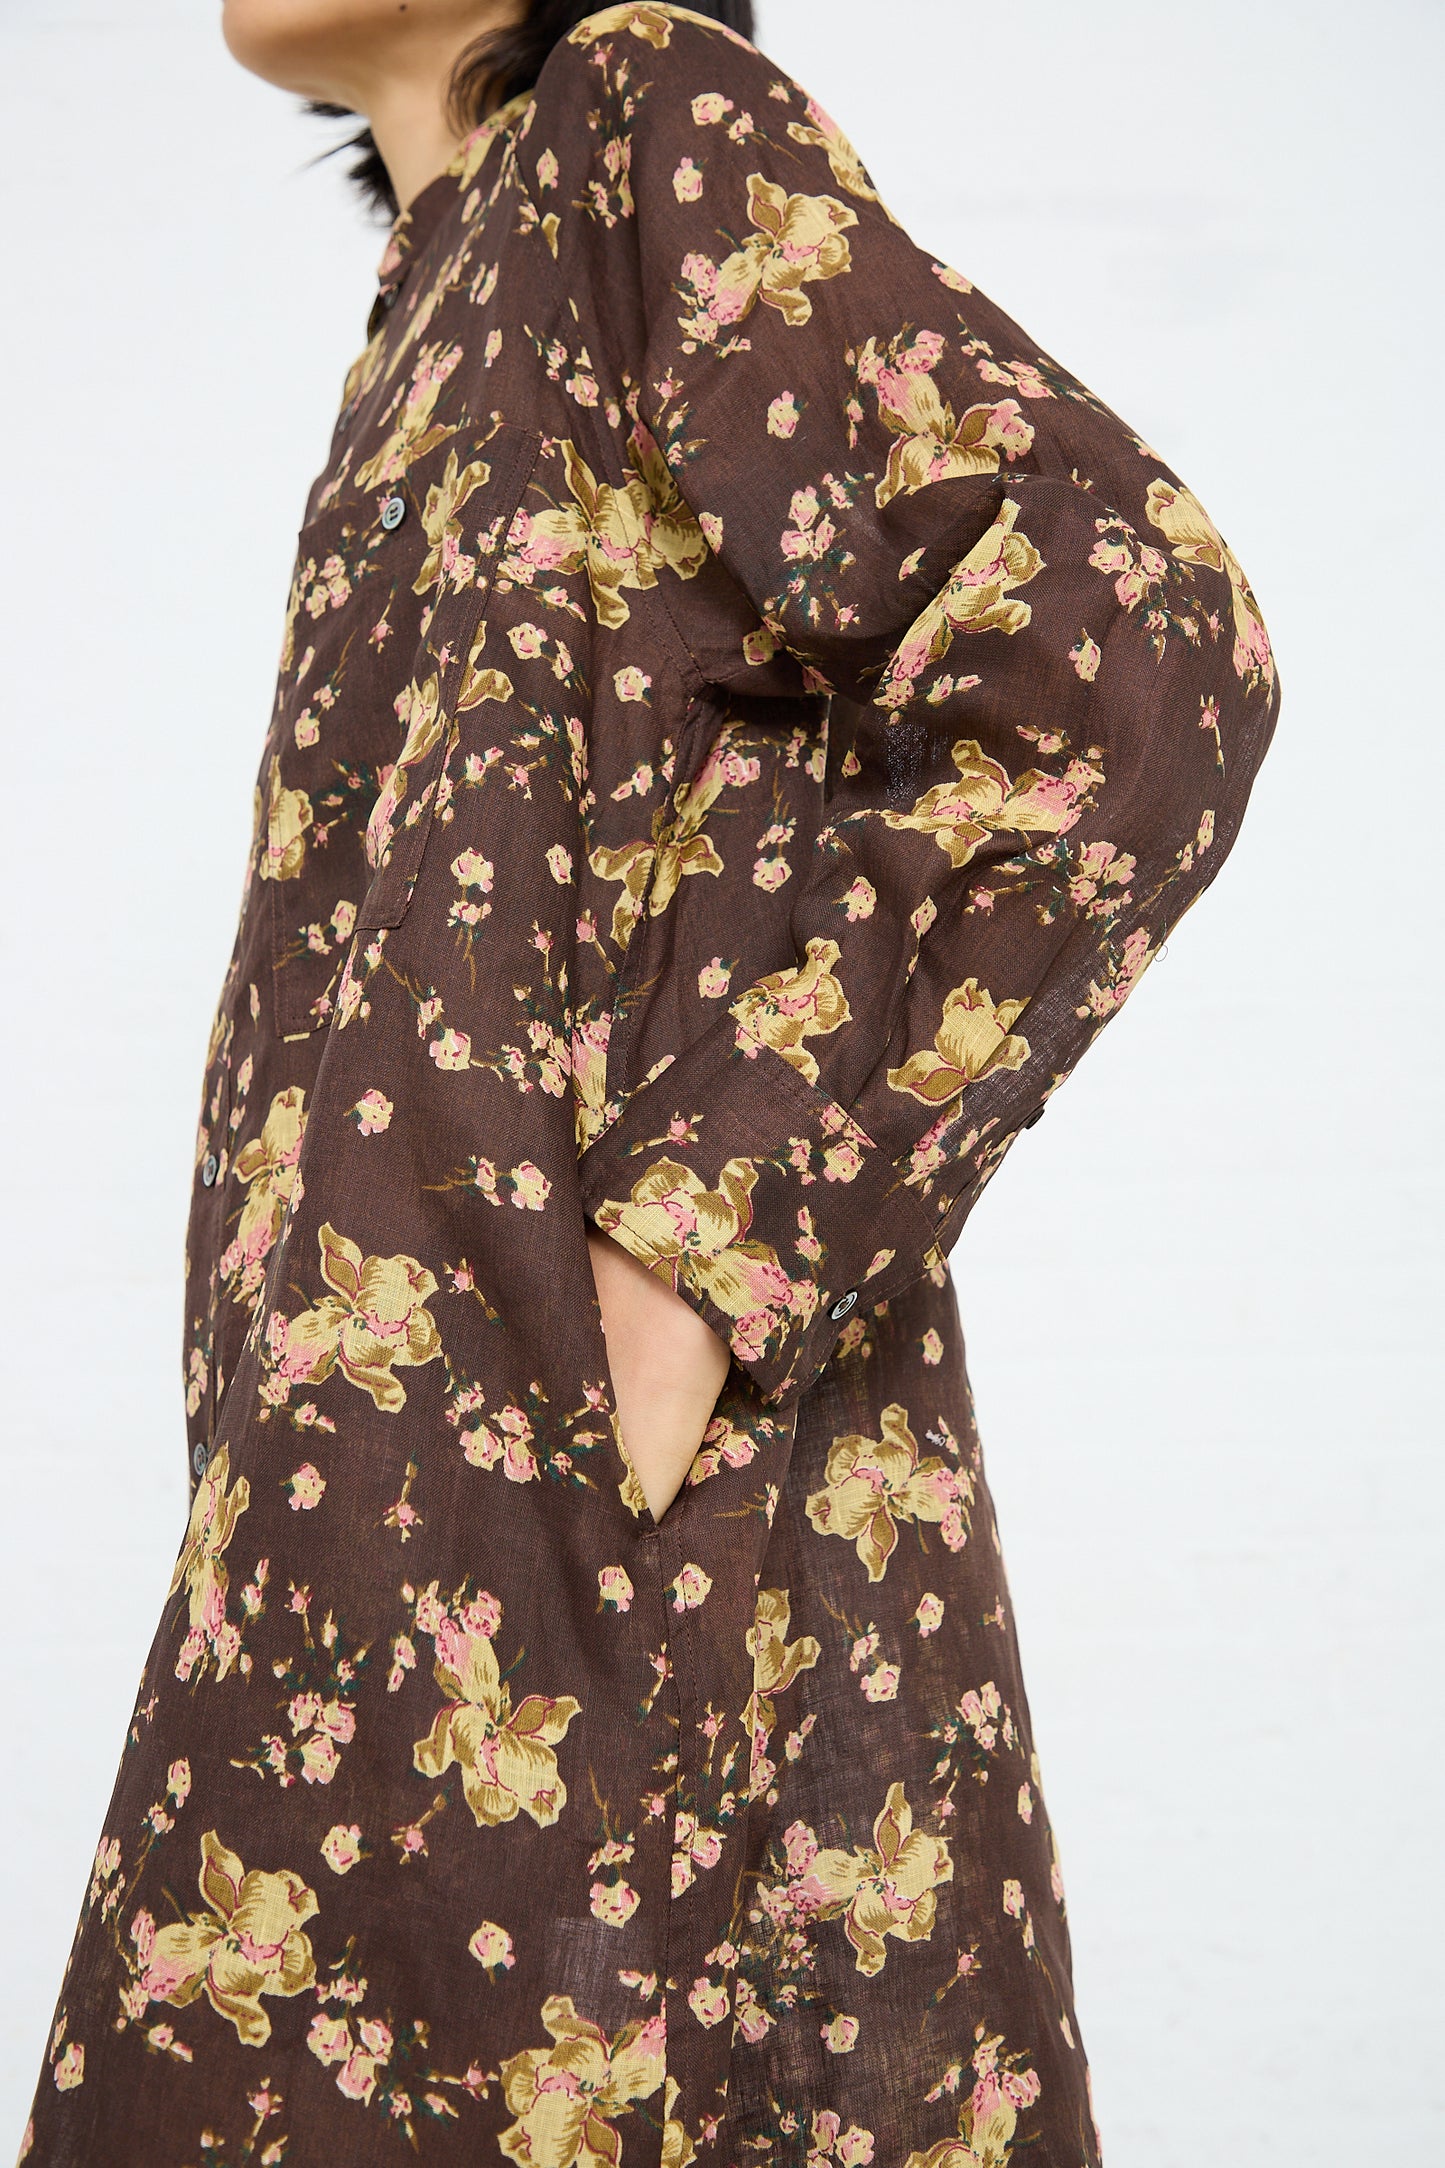 Person wearing an Ichi Antiquités Linen Flower Print Dress in Brown with hands in pockets, shown from shoulder to mid-thigh.